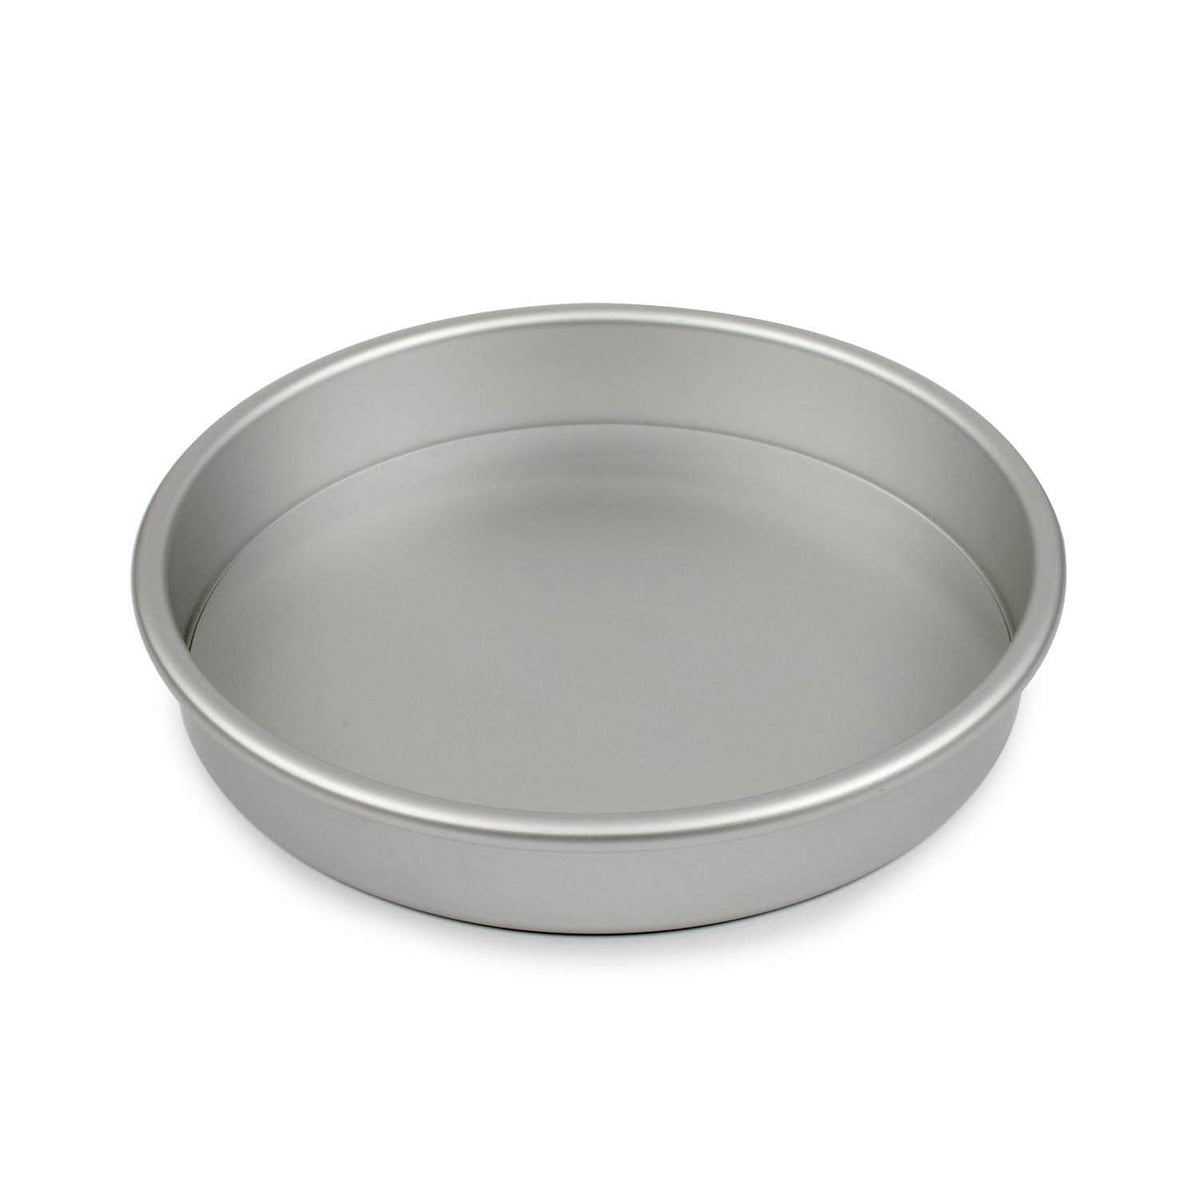 *New* Silver anodised sandwich cake tin 9 inches